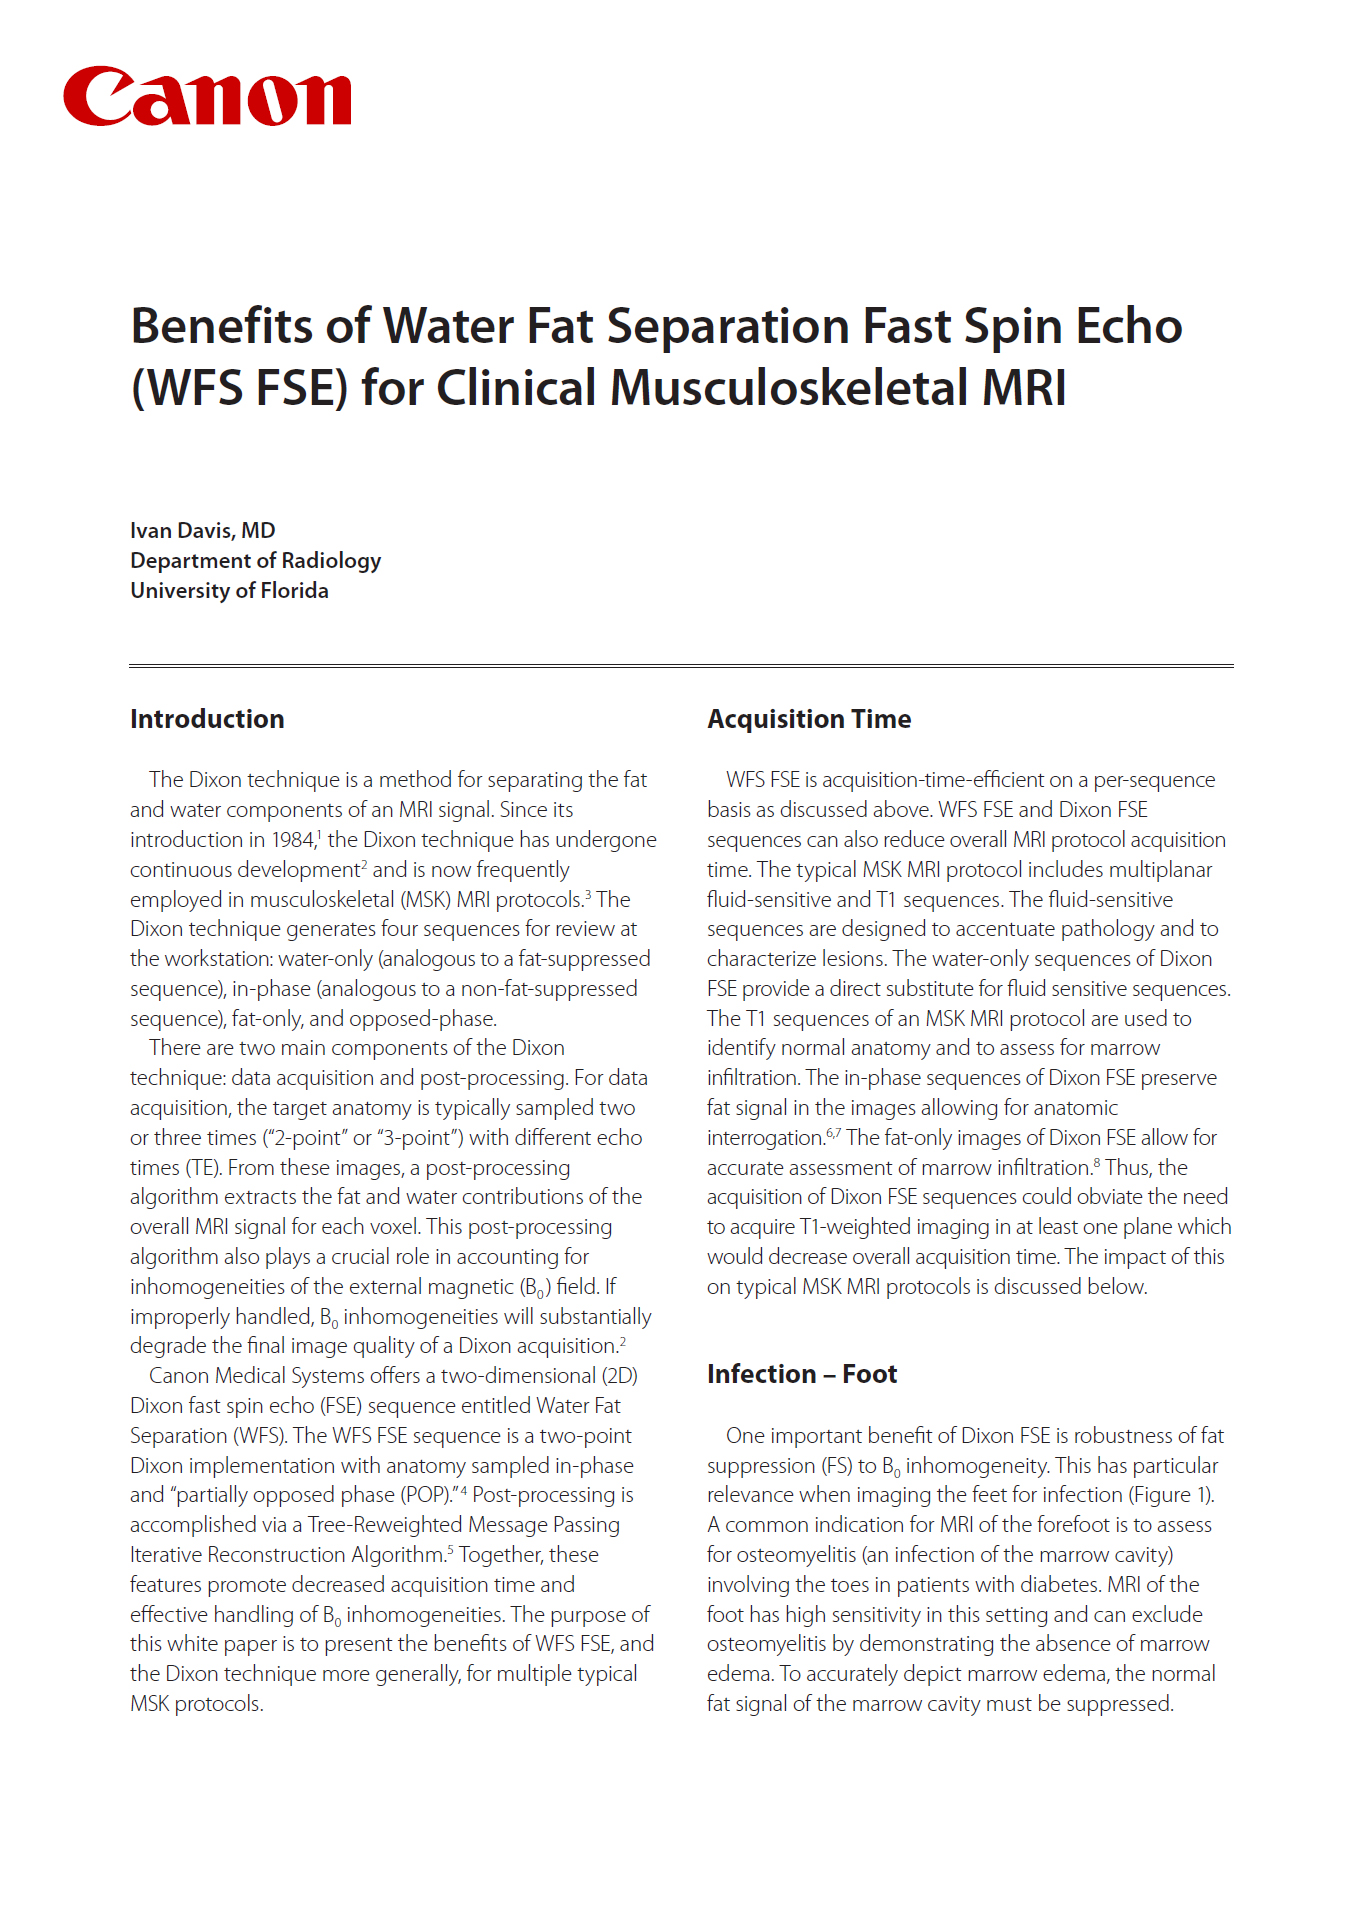 MR Benefits of Water Fat Separation Fast Spin Echo White Paper